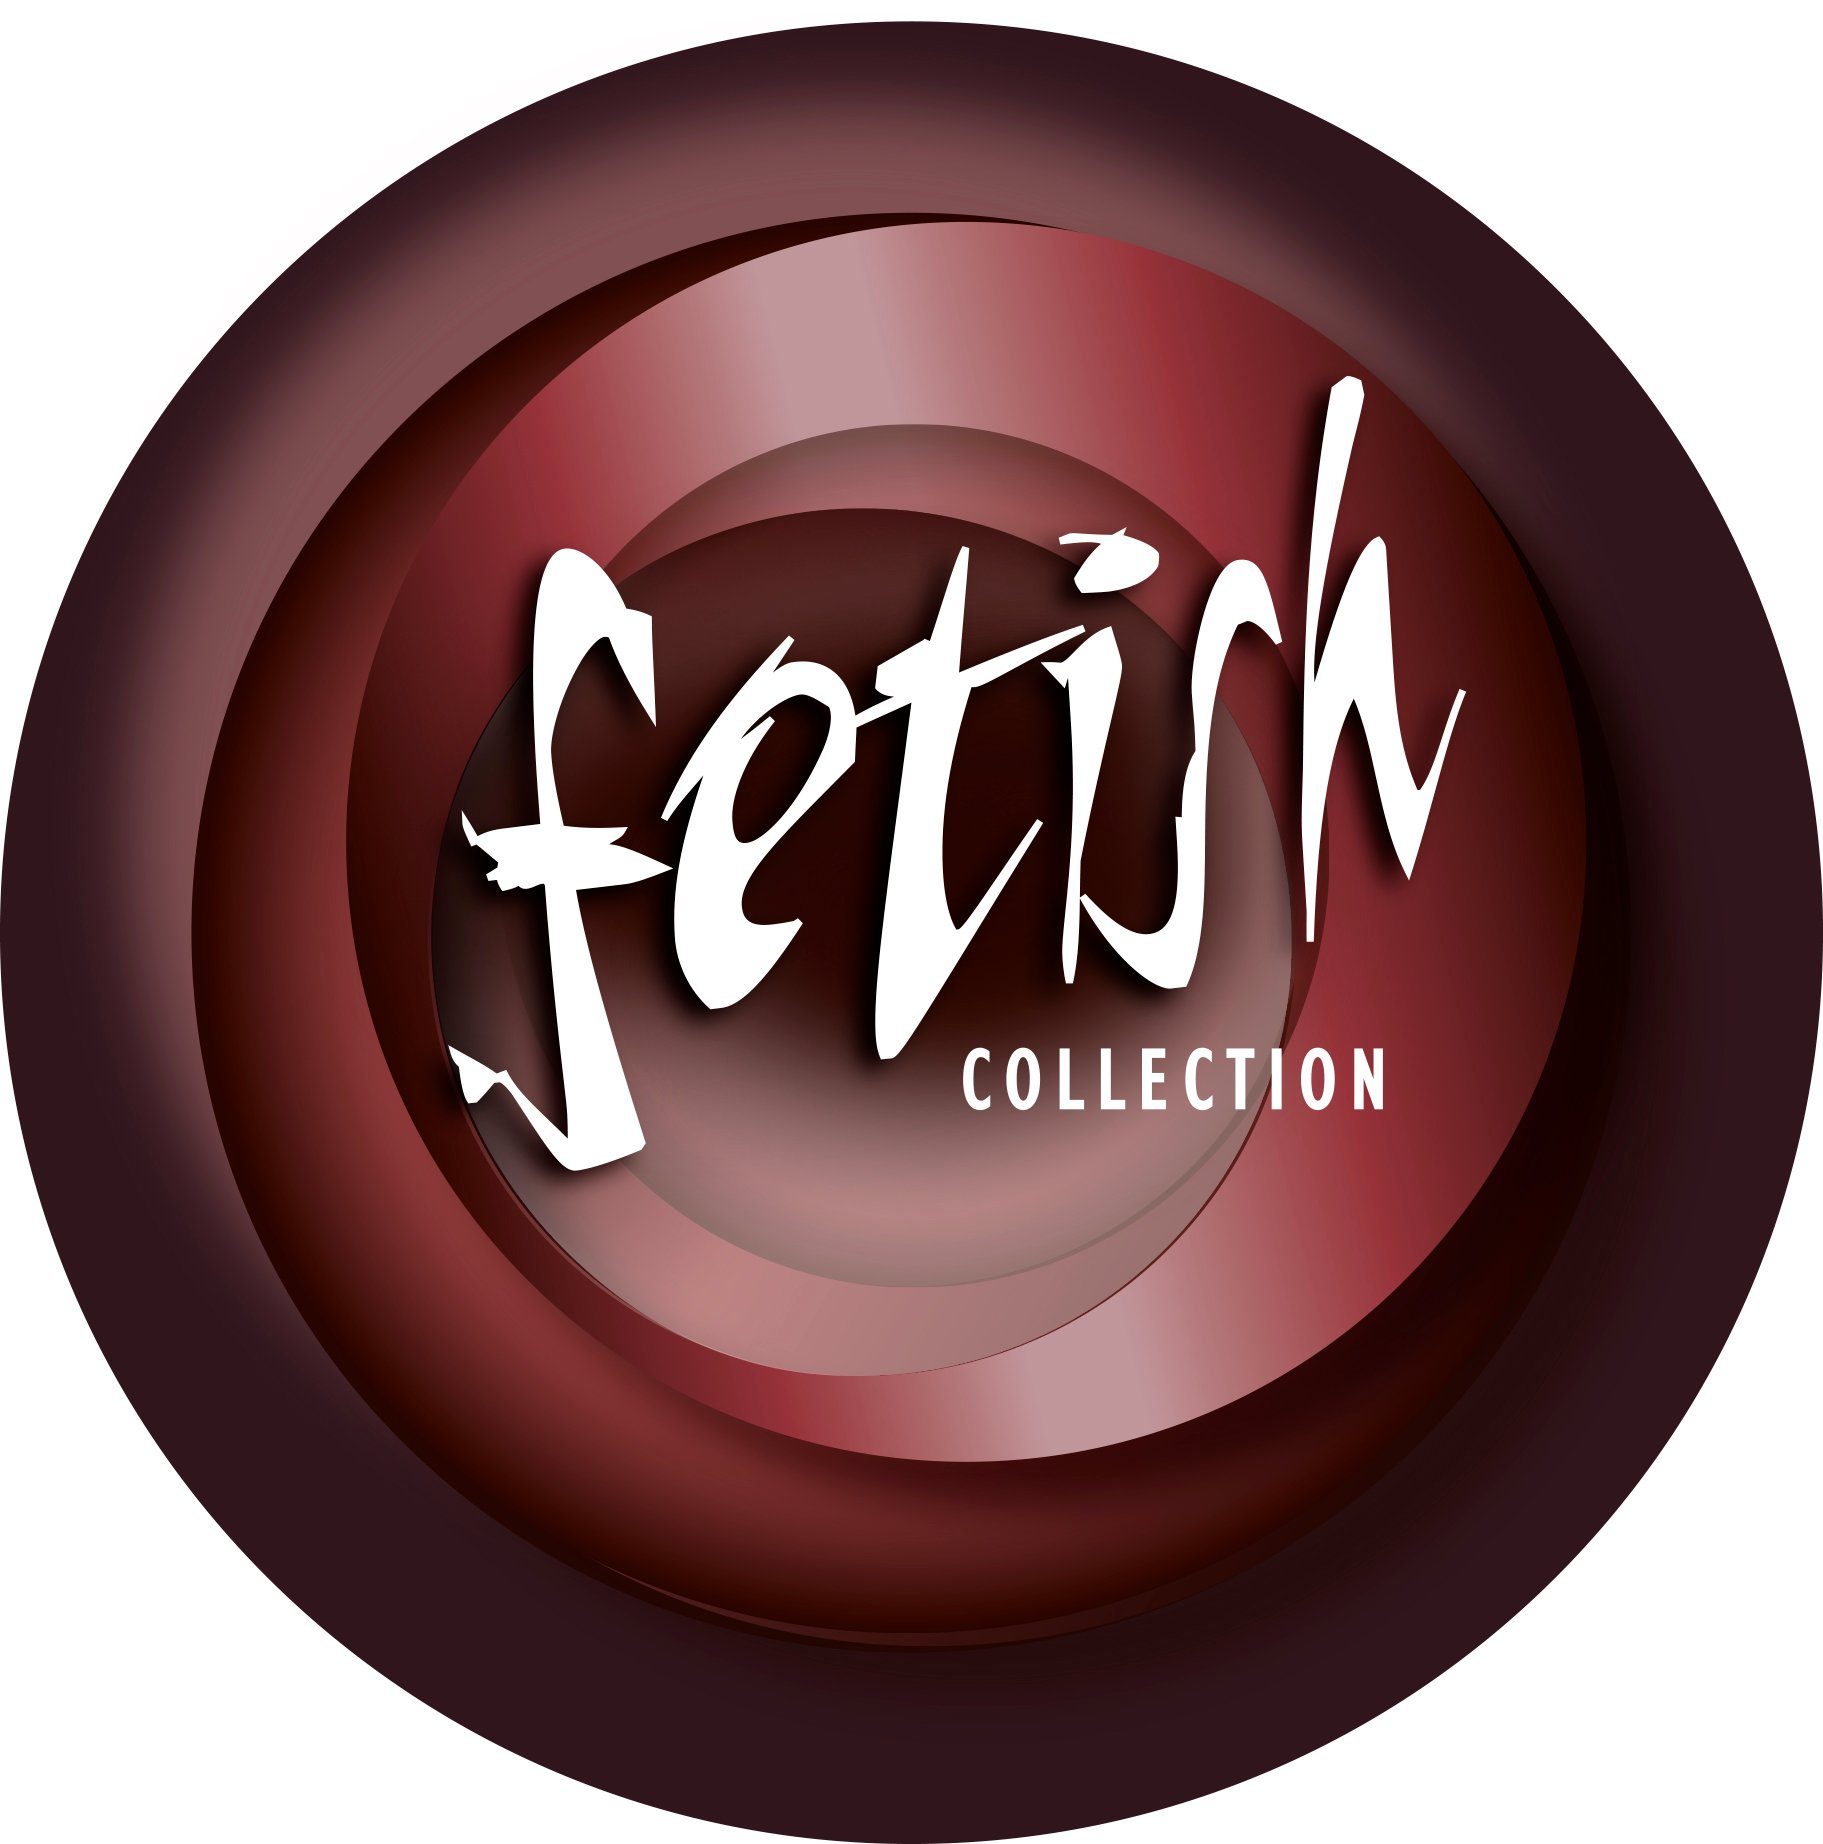 fetish COLLECTION